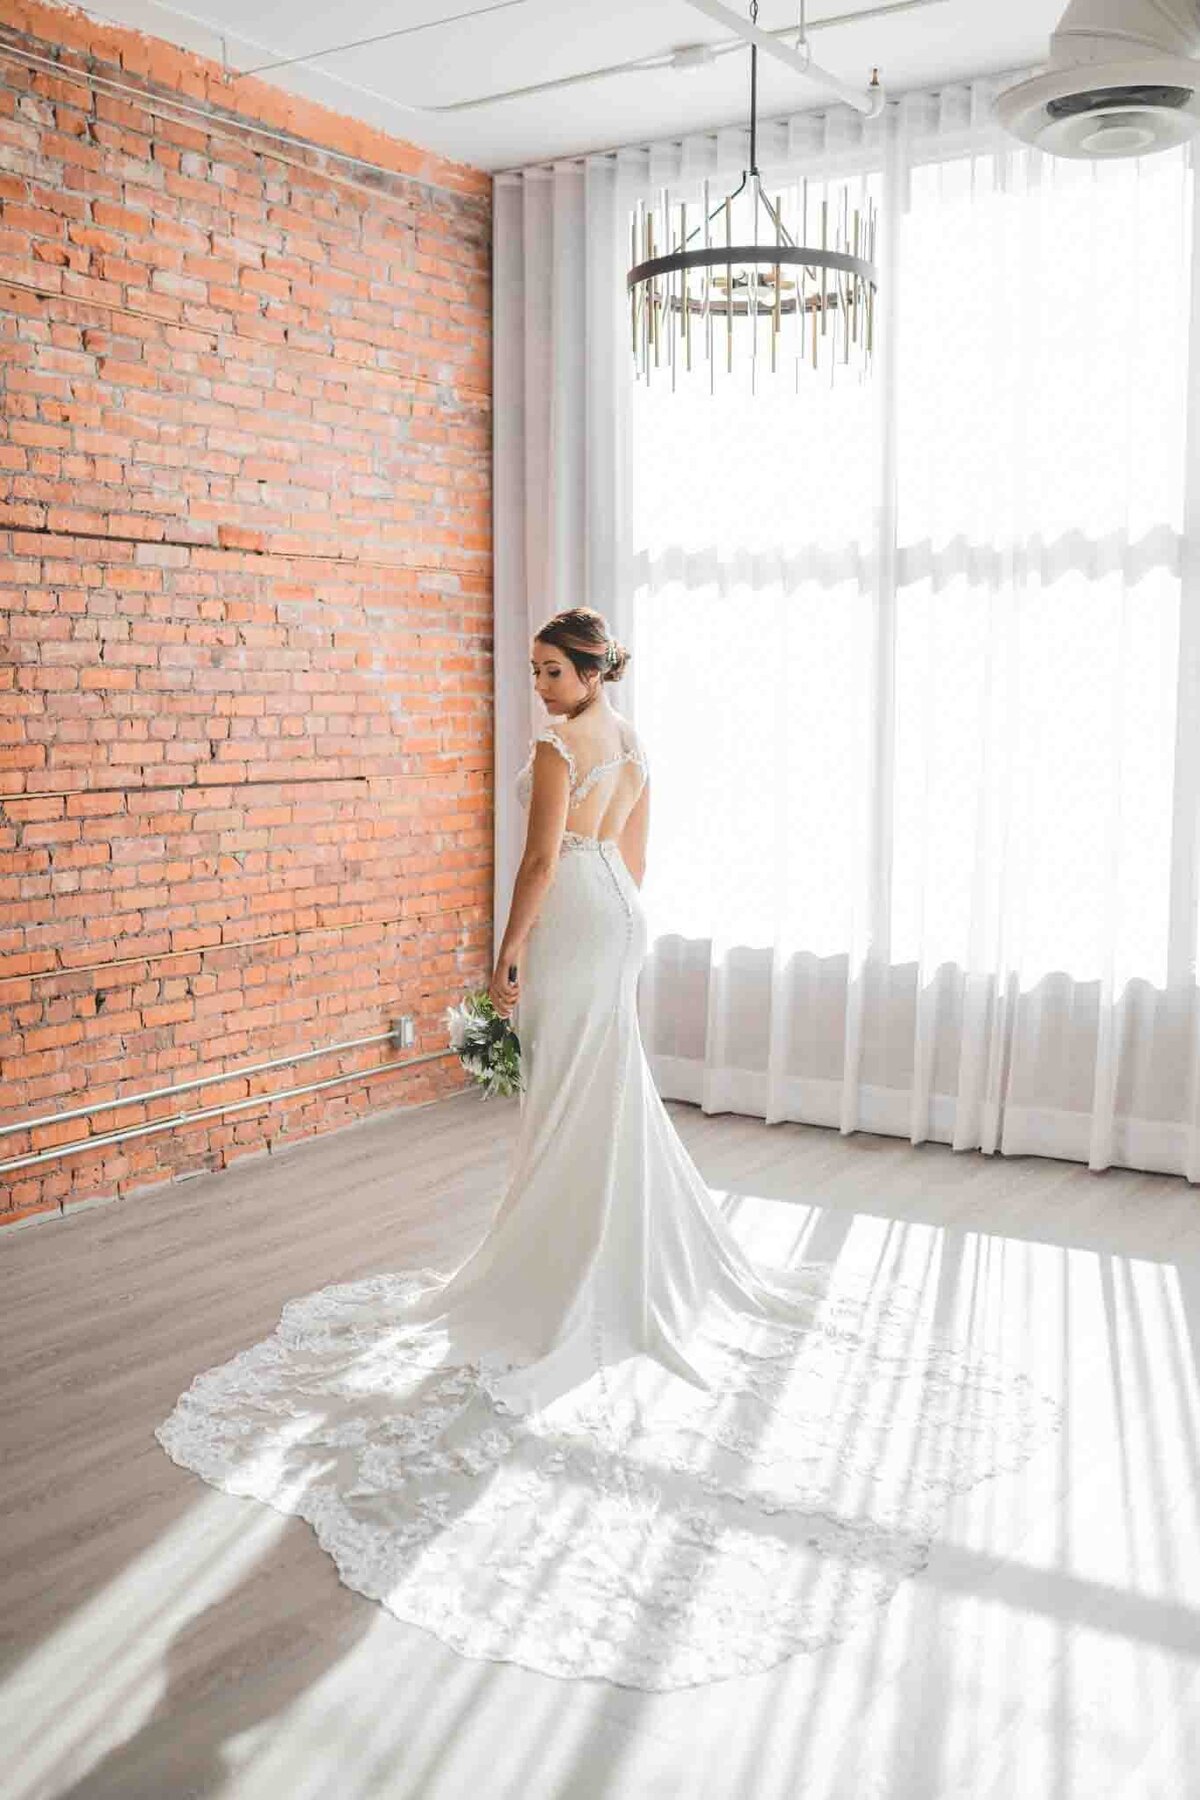 Stunning bridal portrait at Venue 308, a historical warehouse wedding venue in Calgary, featured on the Brontë Bride Vendor Guide.